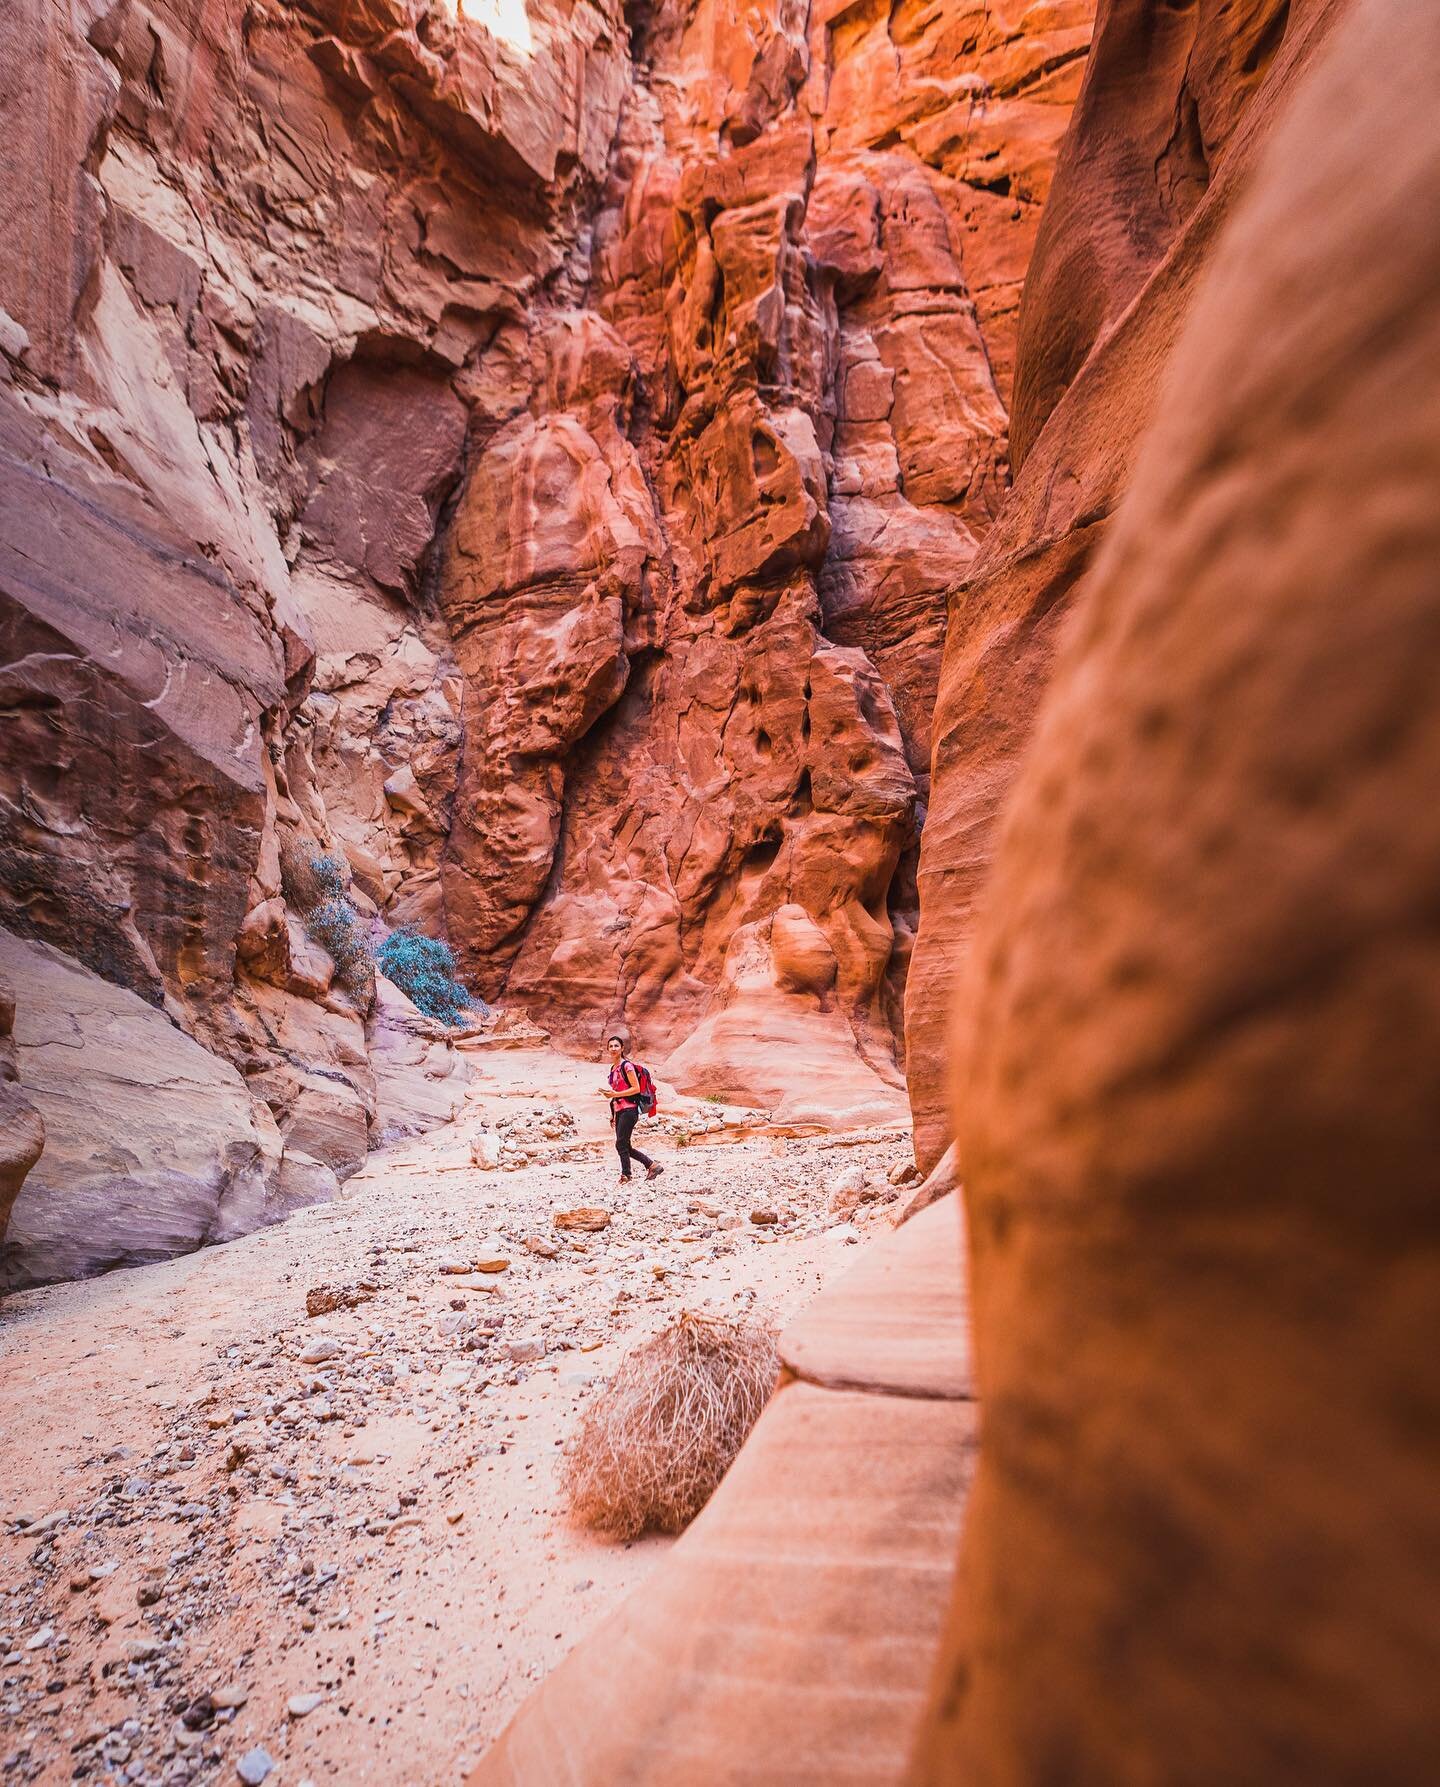 Into the narrows...
👉 swipe for more photos from this hike
.
.
.
🖼 Hiking Wadi Aheimar to Humaima section from the @jordan_trail .

📸 Captured on a commissioned project for @visitjordan.

📷 Shot with @canonme 5DmIV ( 24-70mm f/2.8 )

💻 Edited wi